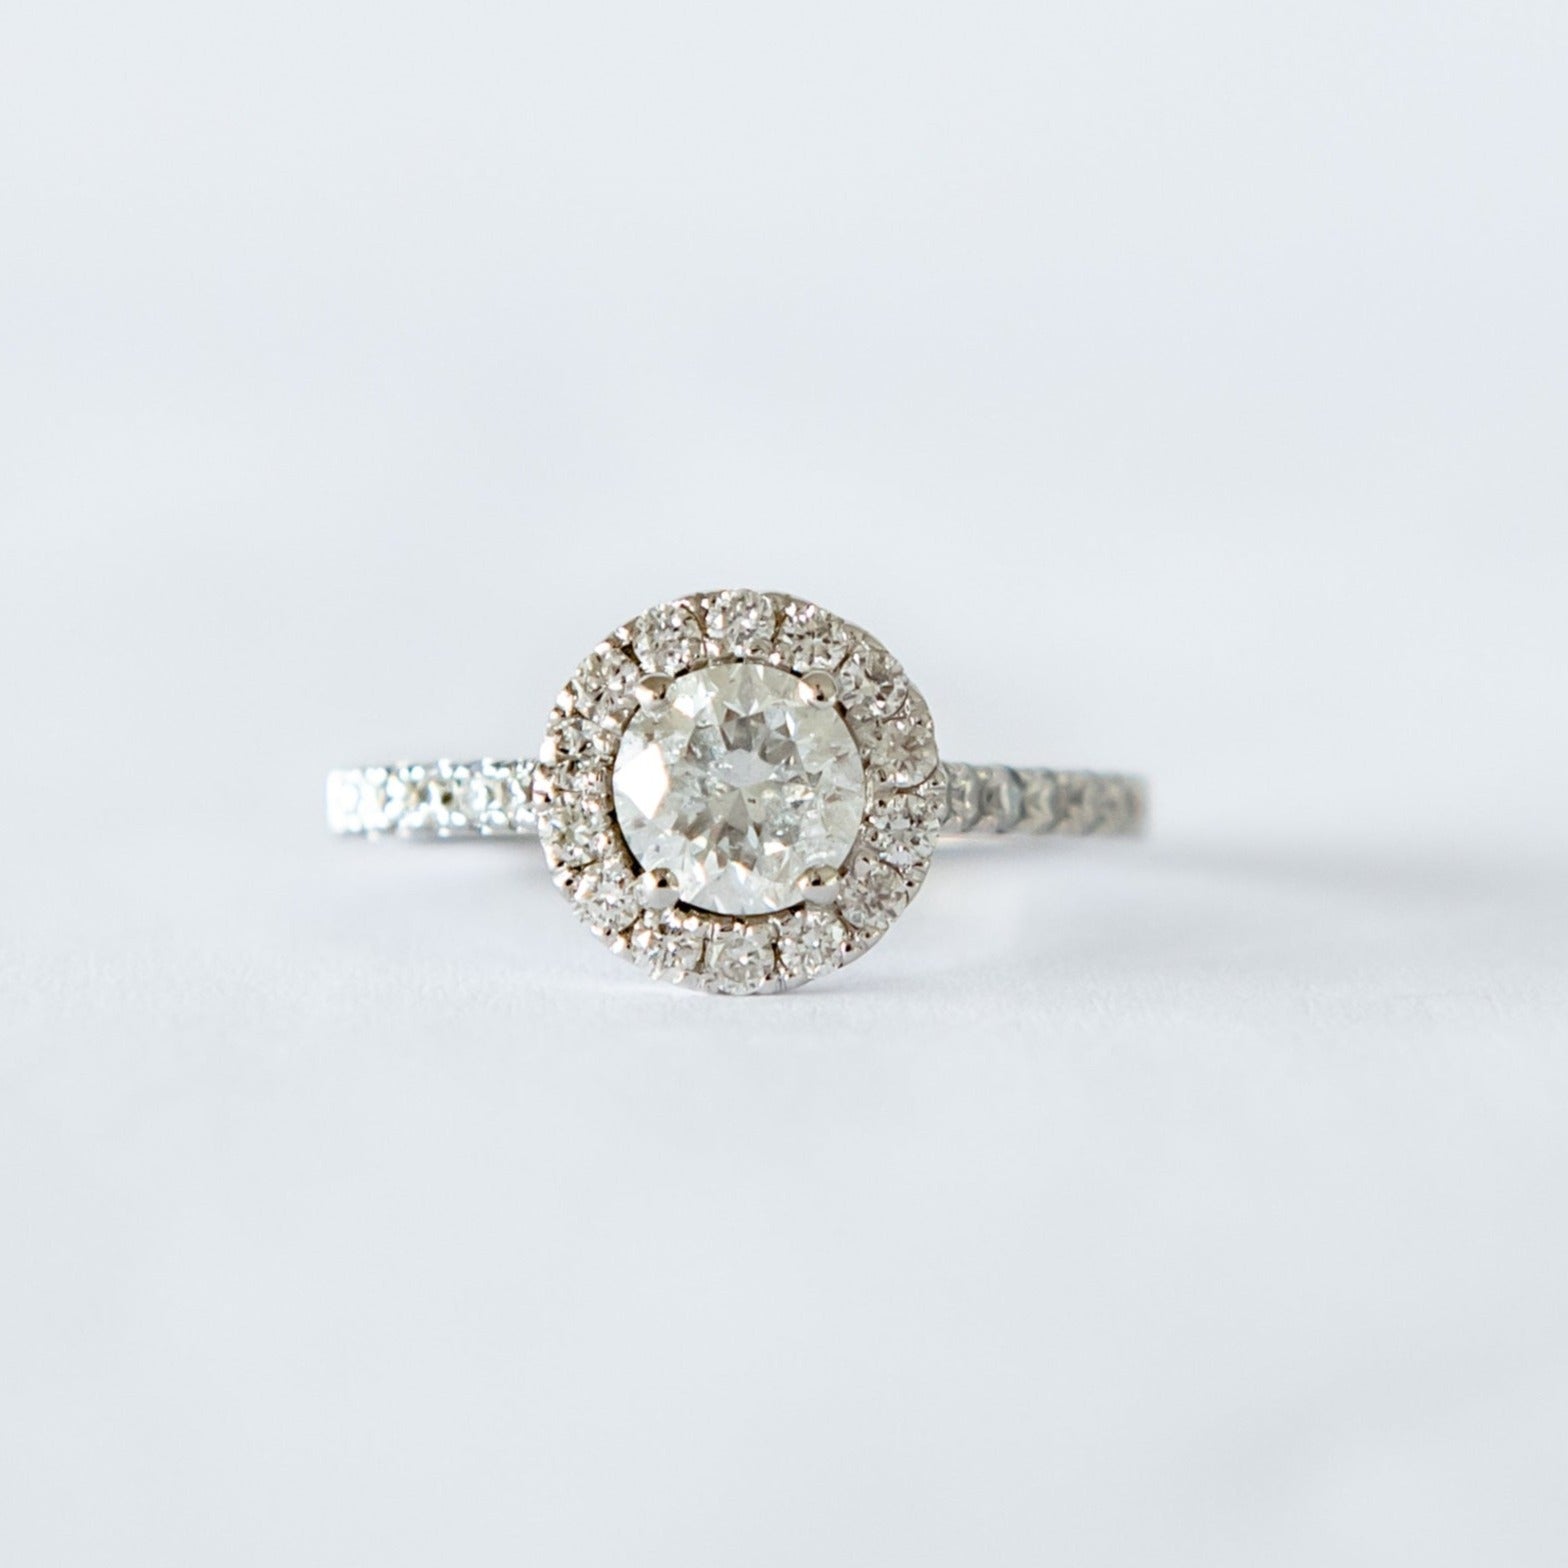 18ct white gold ring with a 0,70ct round brilliant cut diamond as the centre stone and a halo of diamonds surrounding it.